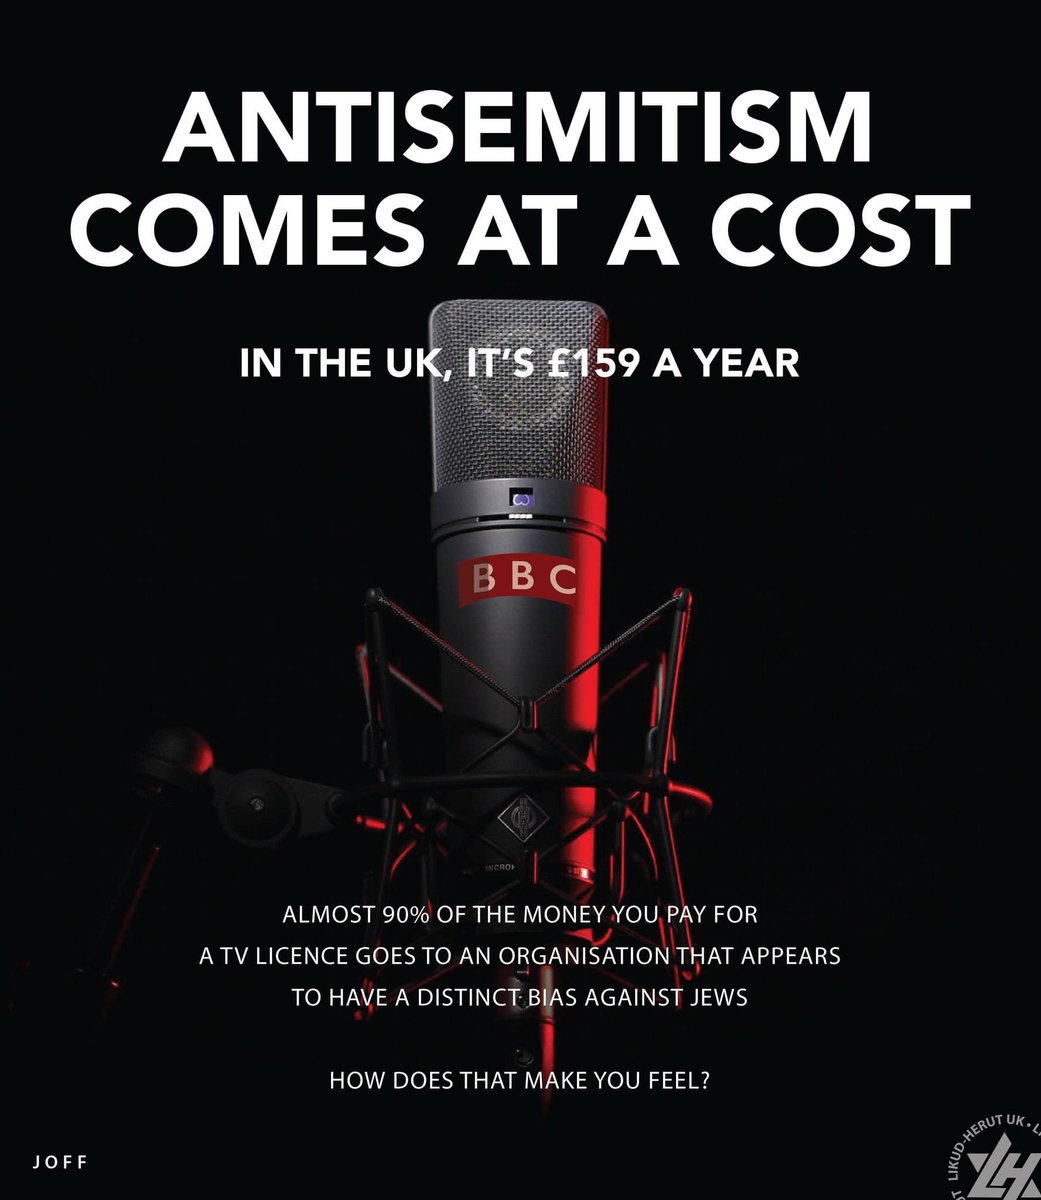 What concerns us far more than the current #BBCScandal is the corporation's stance when reporting on anything vaguely related to #Israel, as amply demonstrated by a news anchor recently asking Naftali Bennett if Israeli troops were 'happy to kill children'.
#antisemitism #BBC